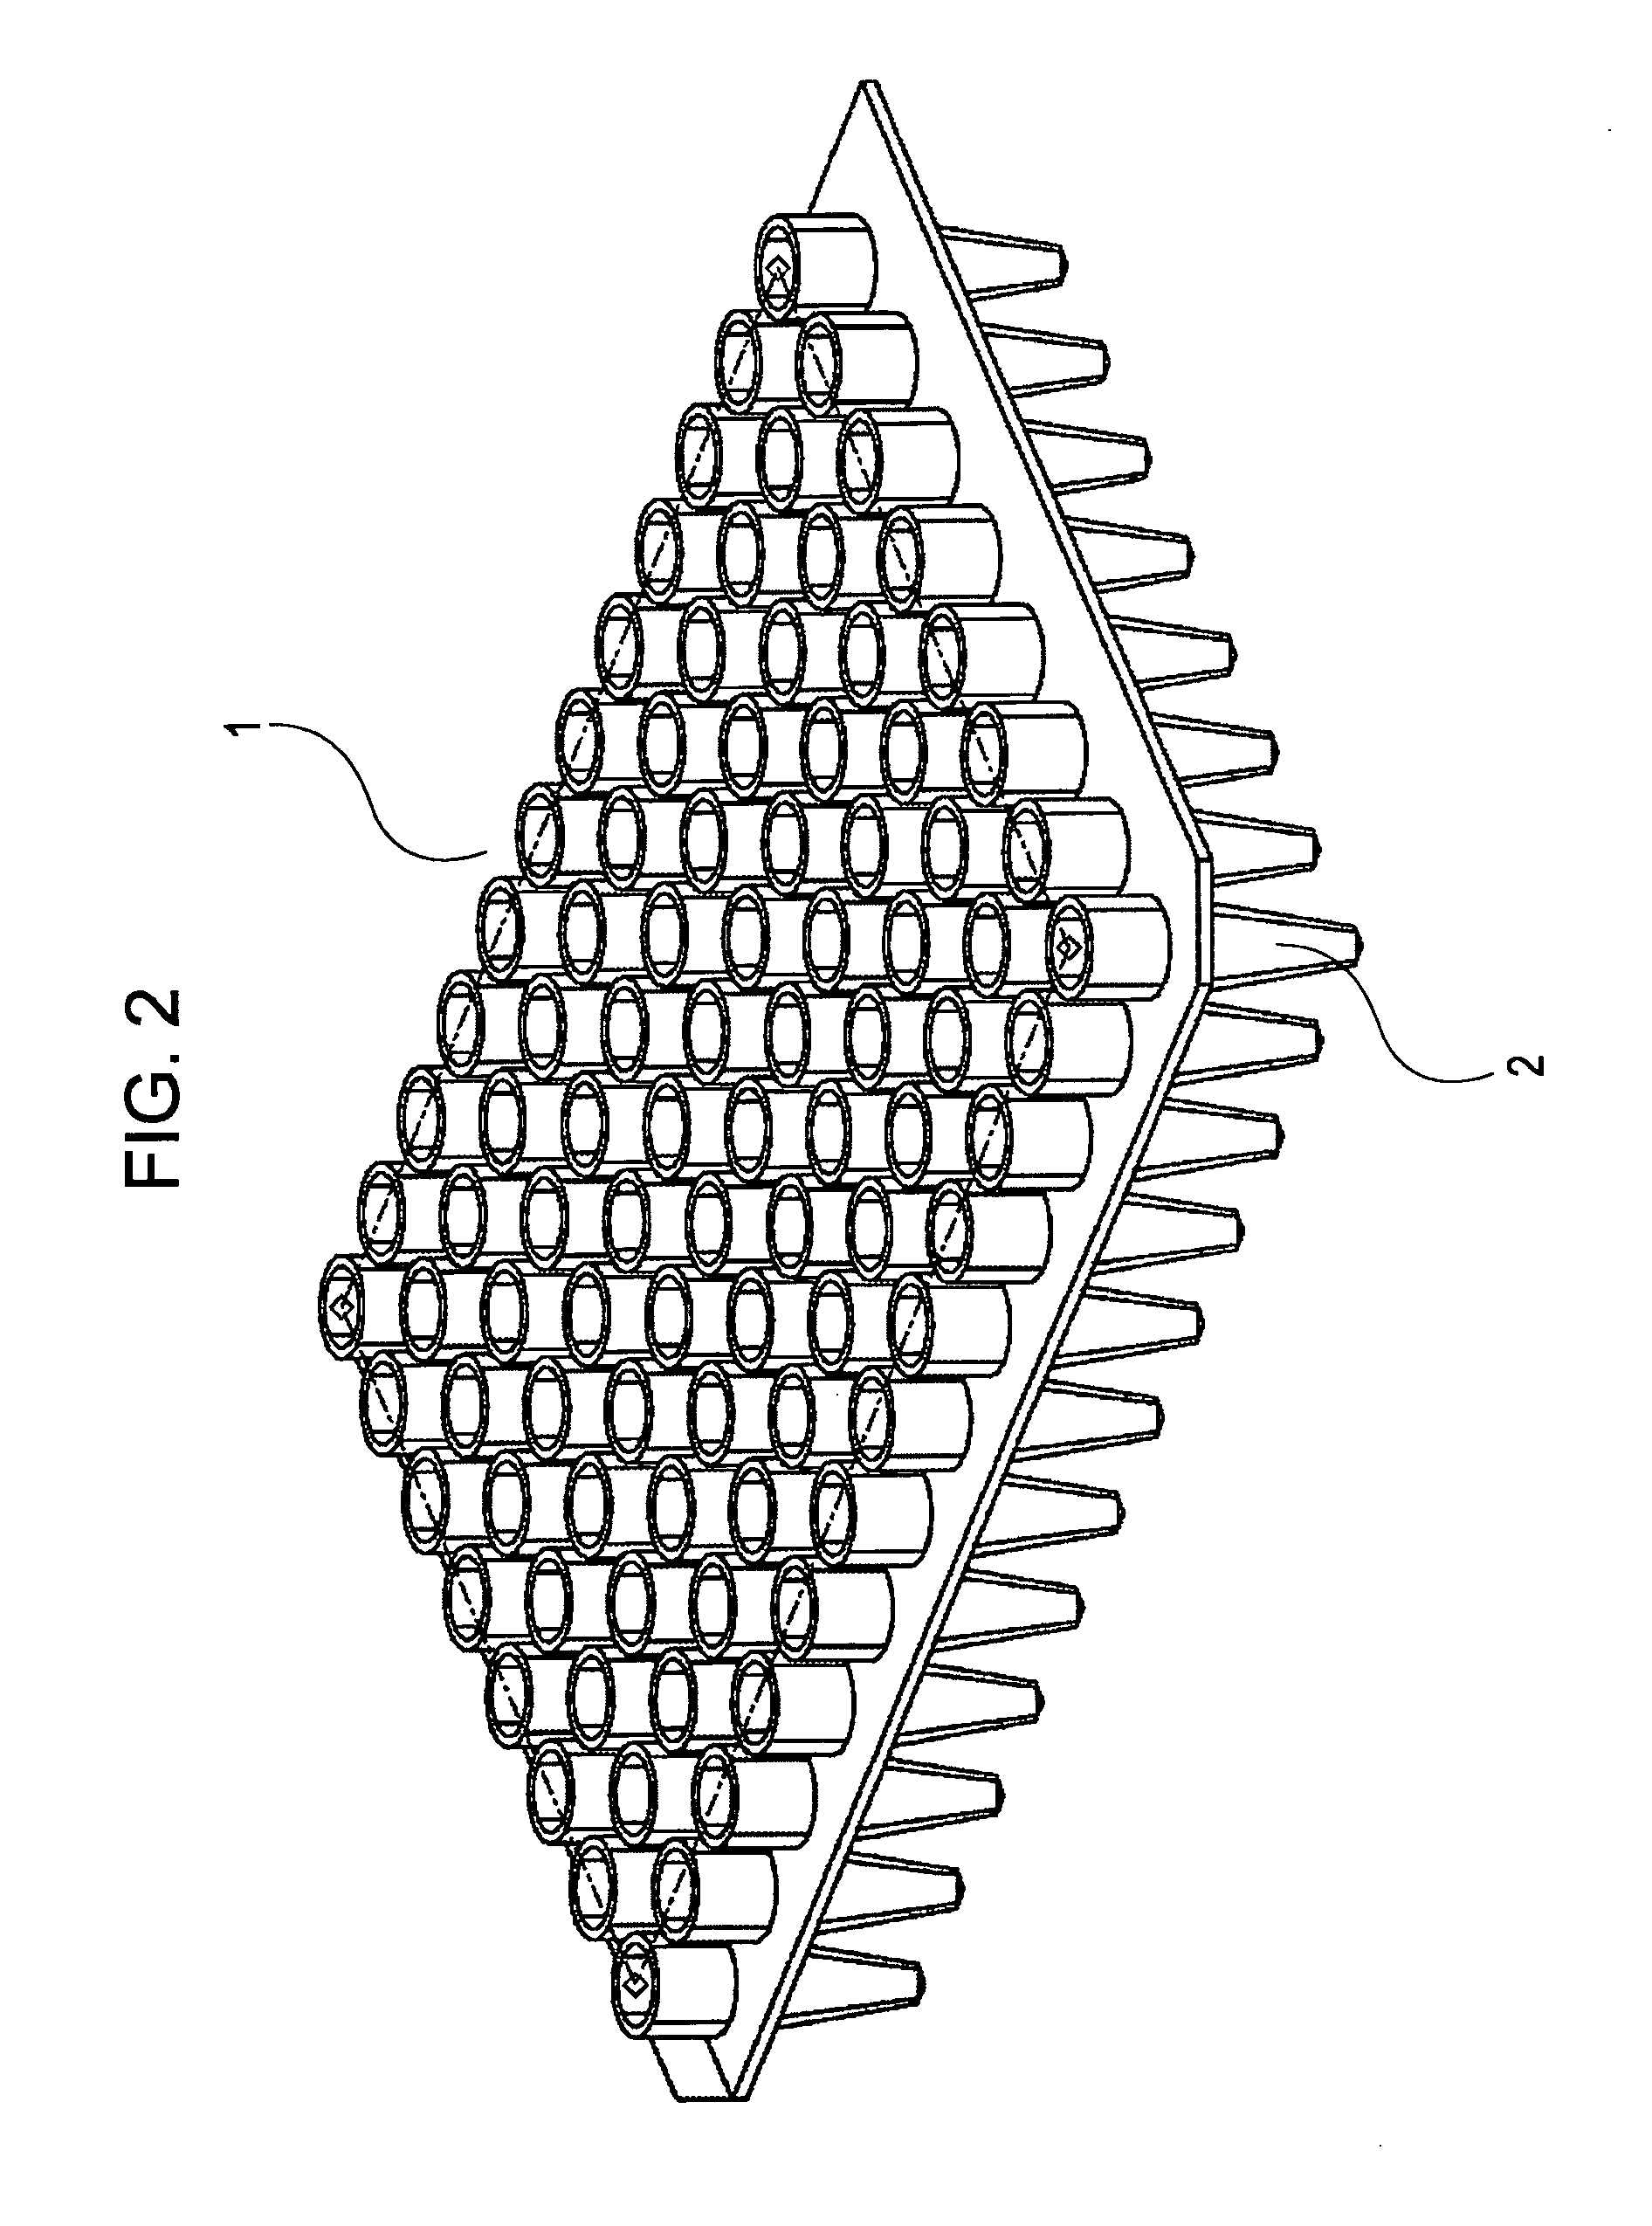 Apparatus for performing biochemical processing using a container with a plurality of wells and the container for the apparatus